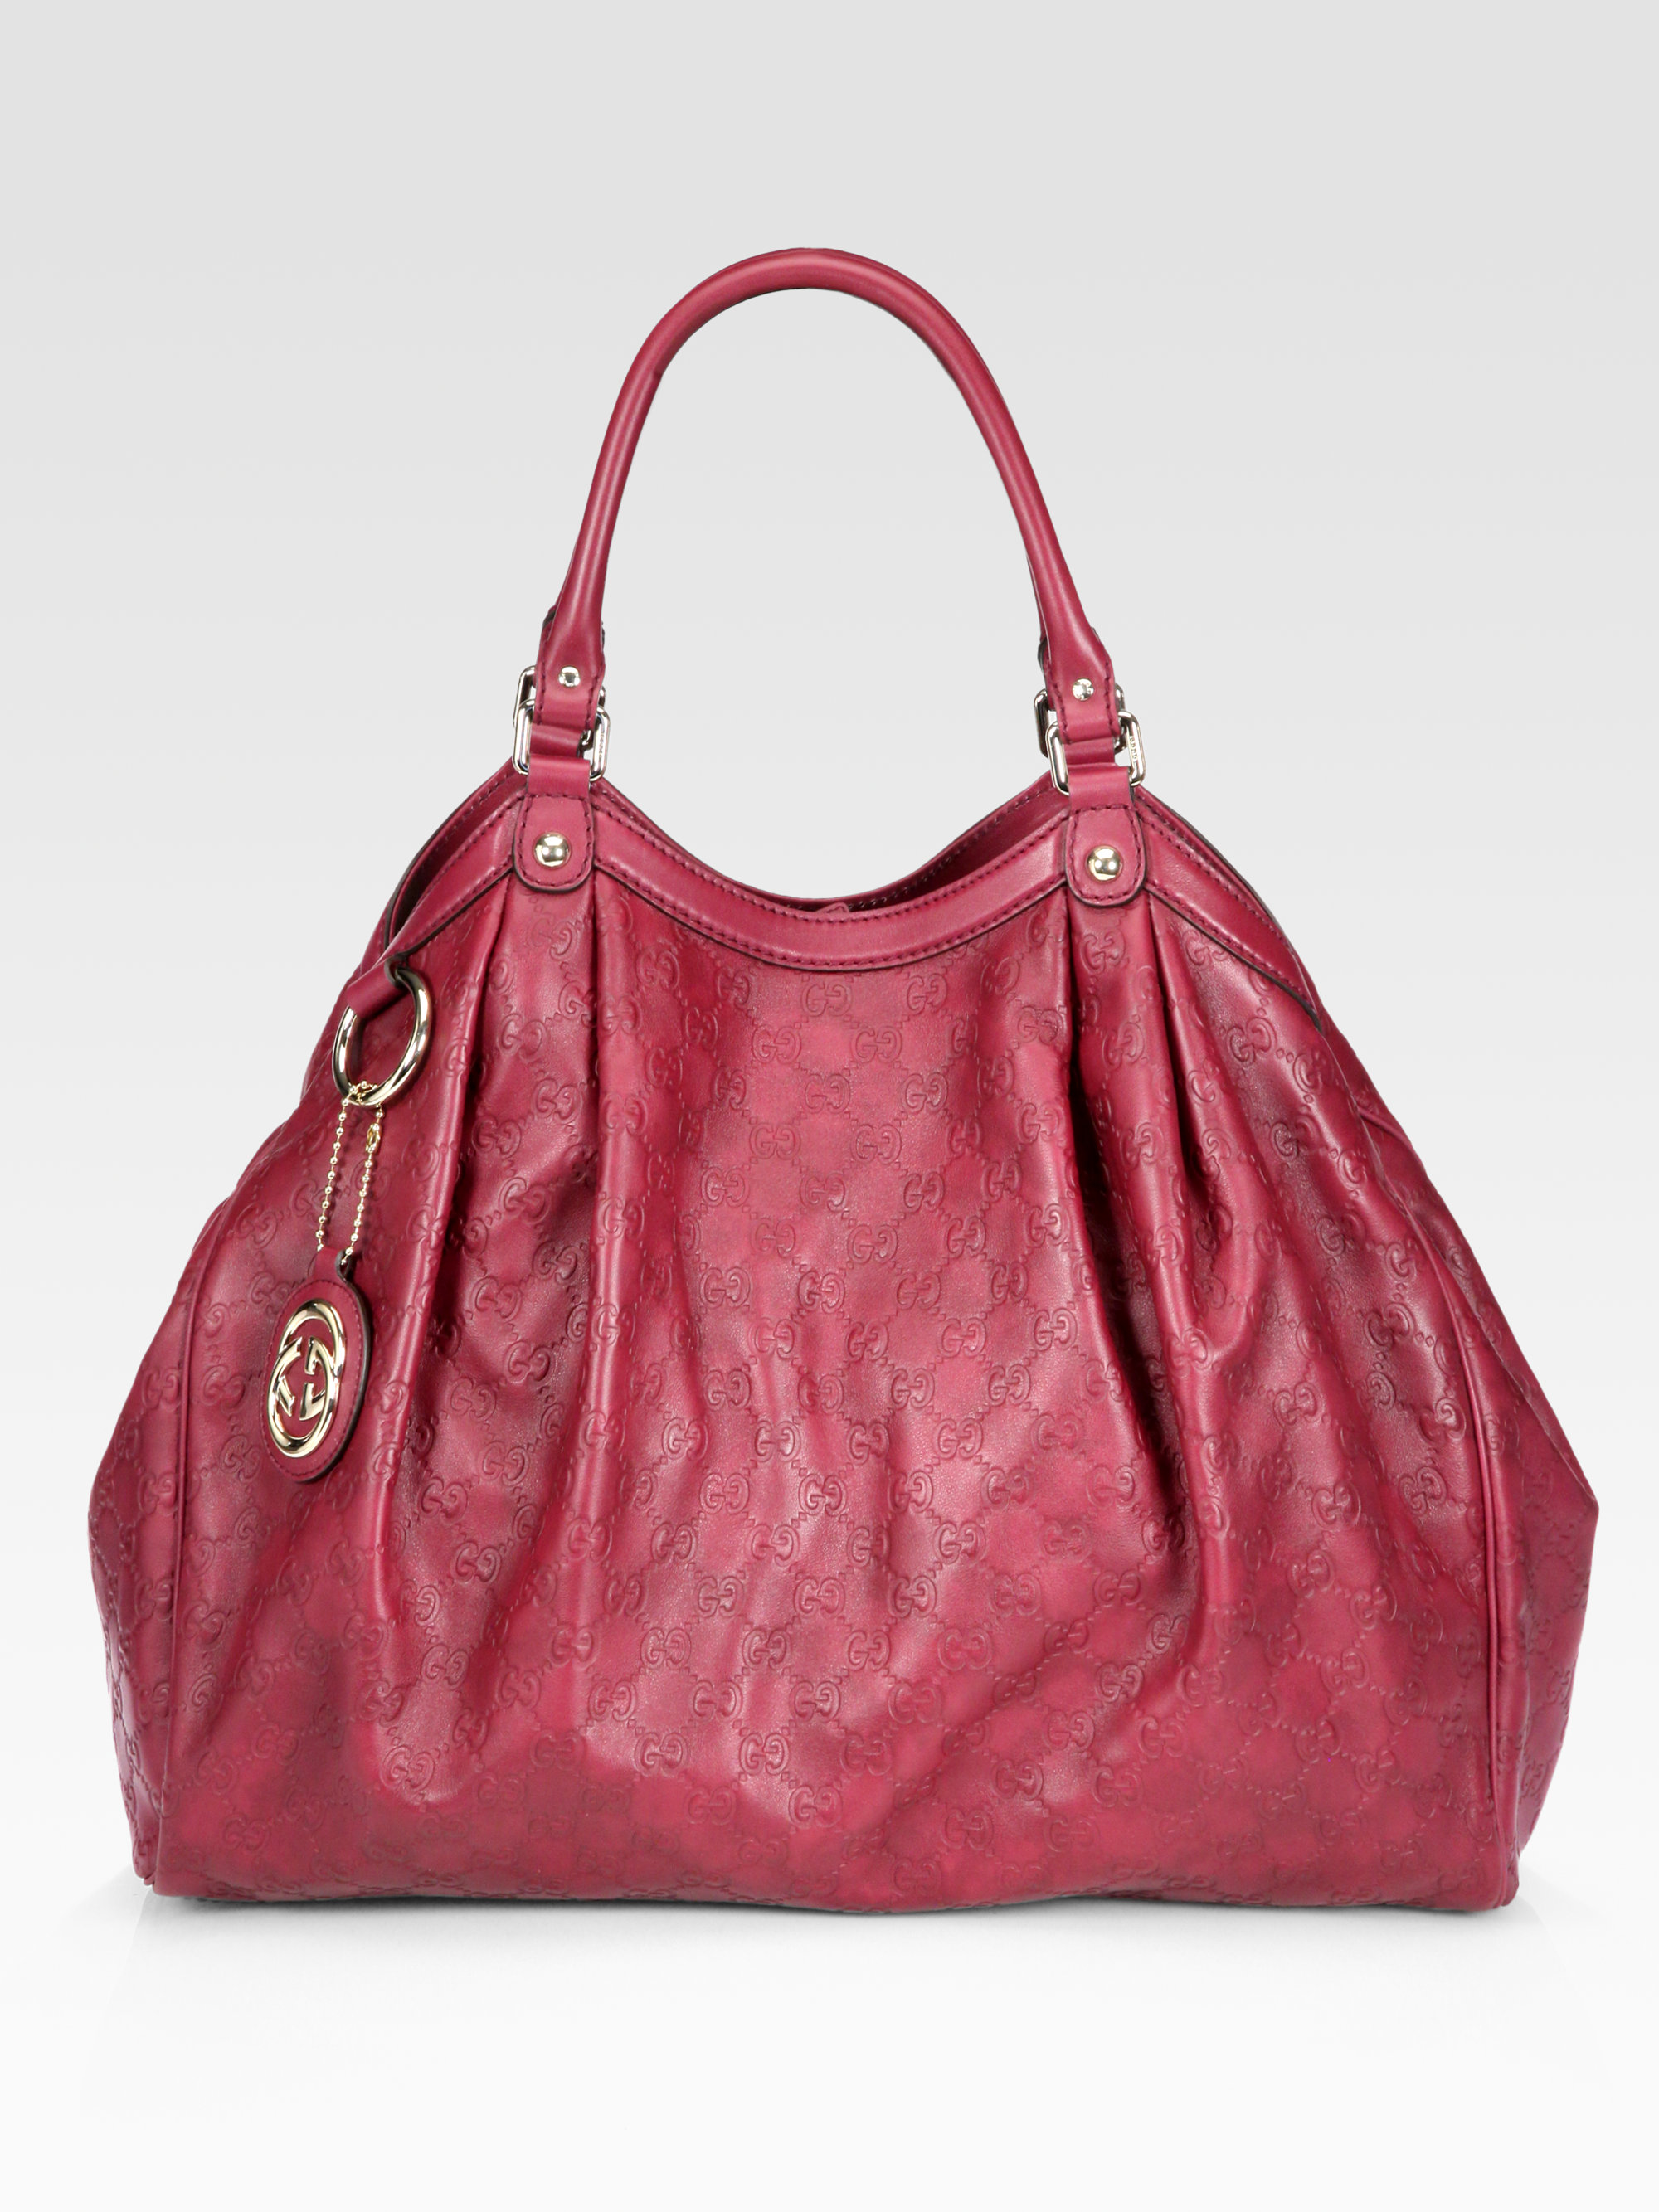 Gucci Sukey Gg Large Tote Bag in Purple (cherry) | Lyst